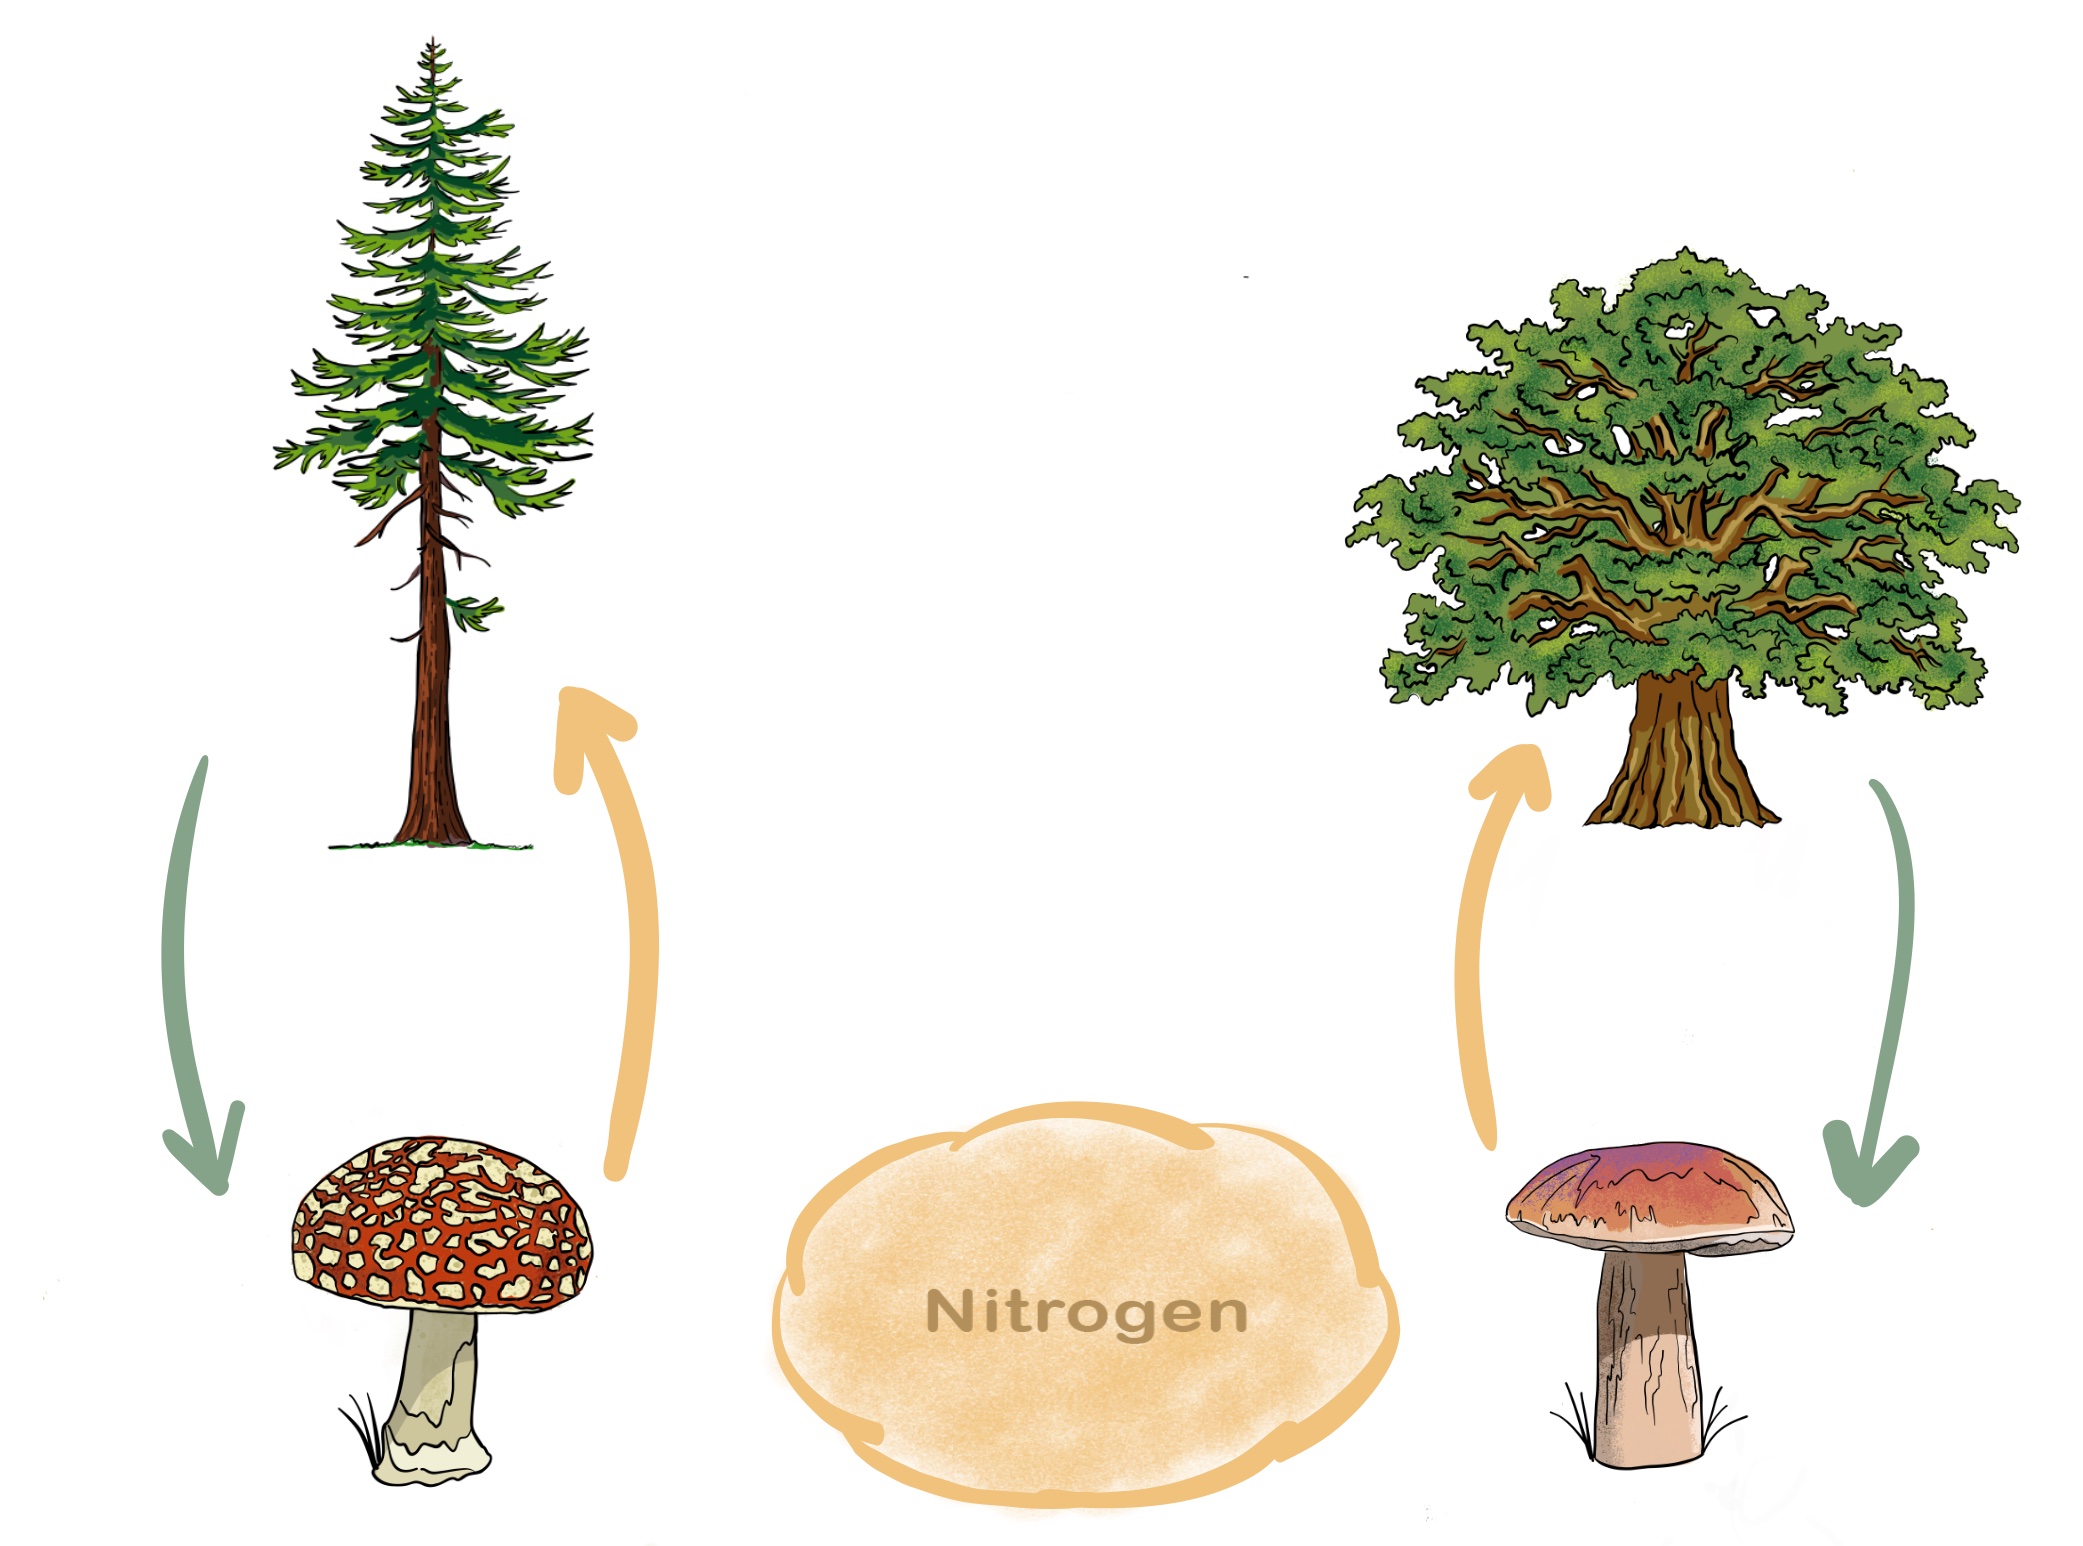 Two trees growing with a shared nutrient pool